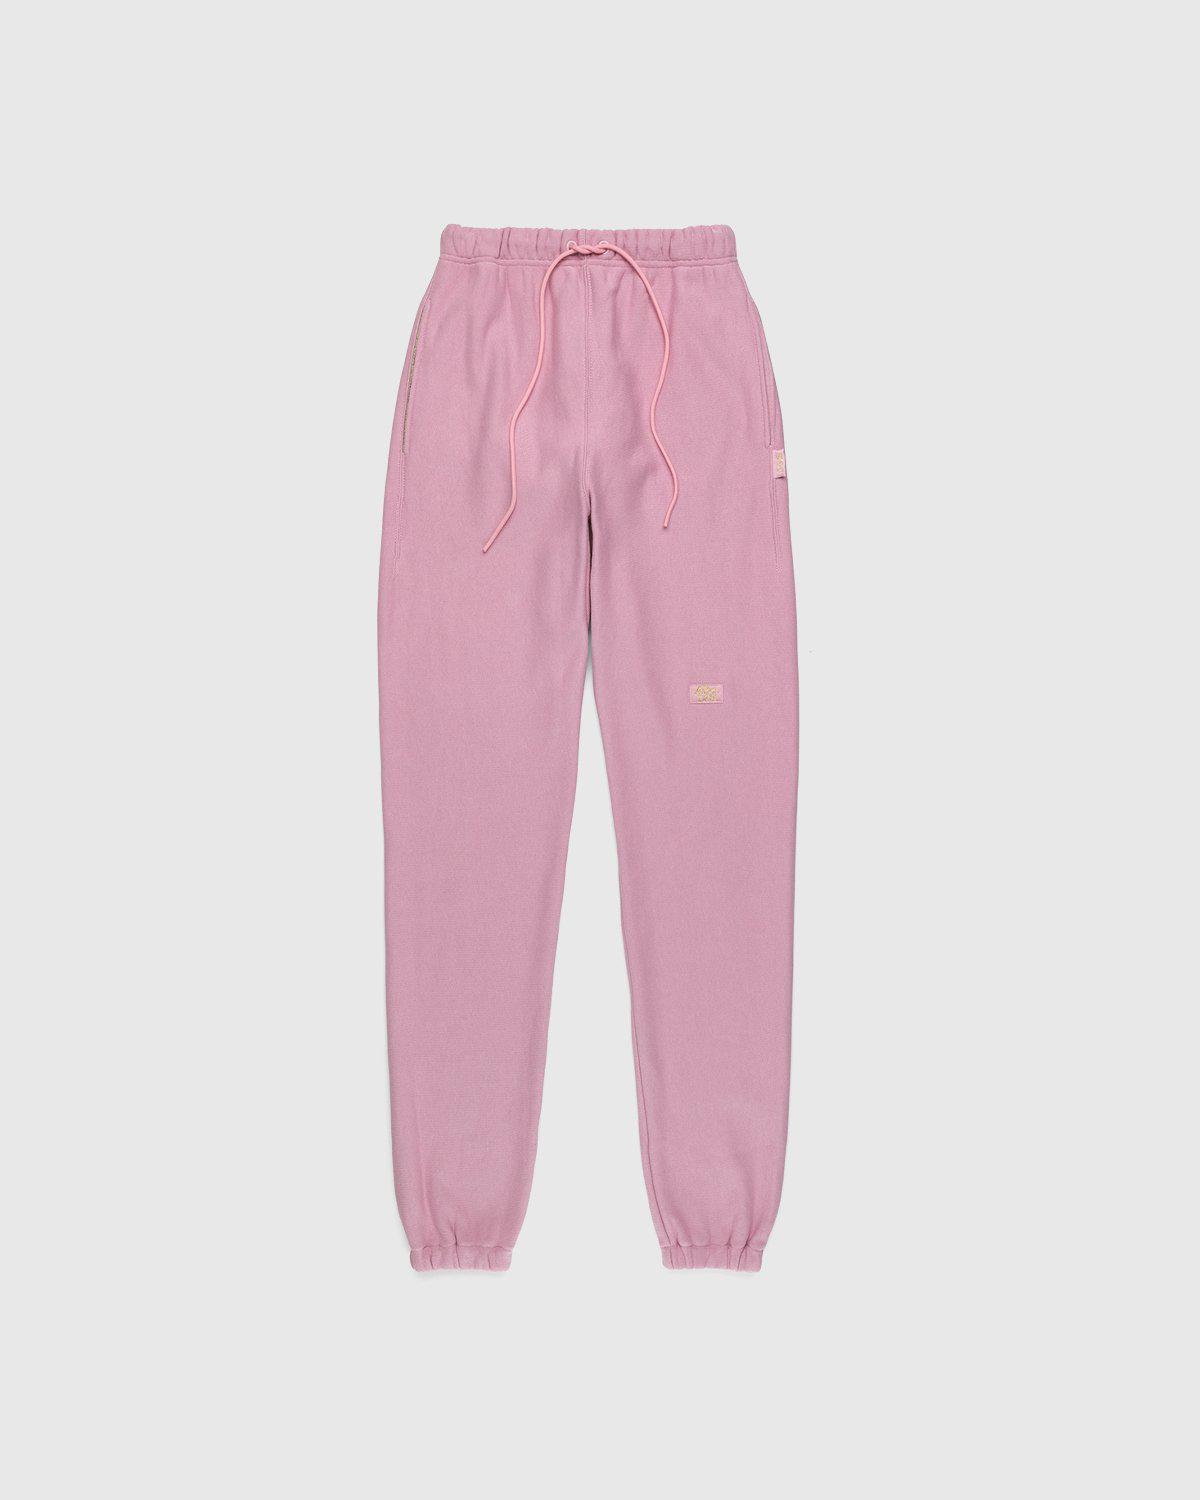 Abc. – French Terry Sweatpants Morganite by ABC.